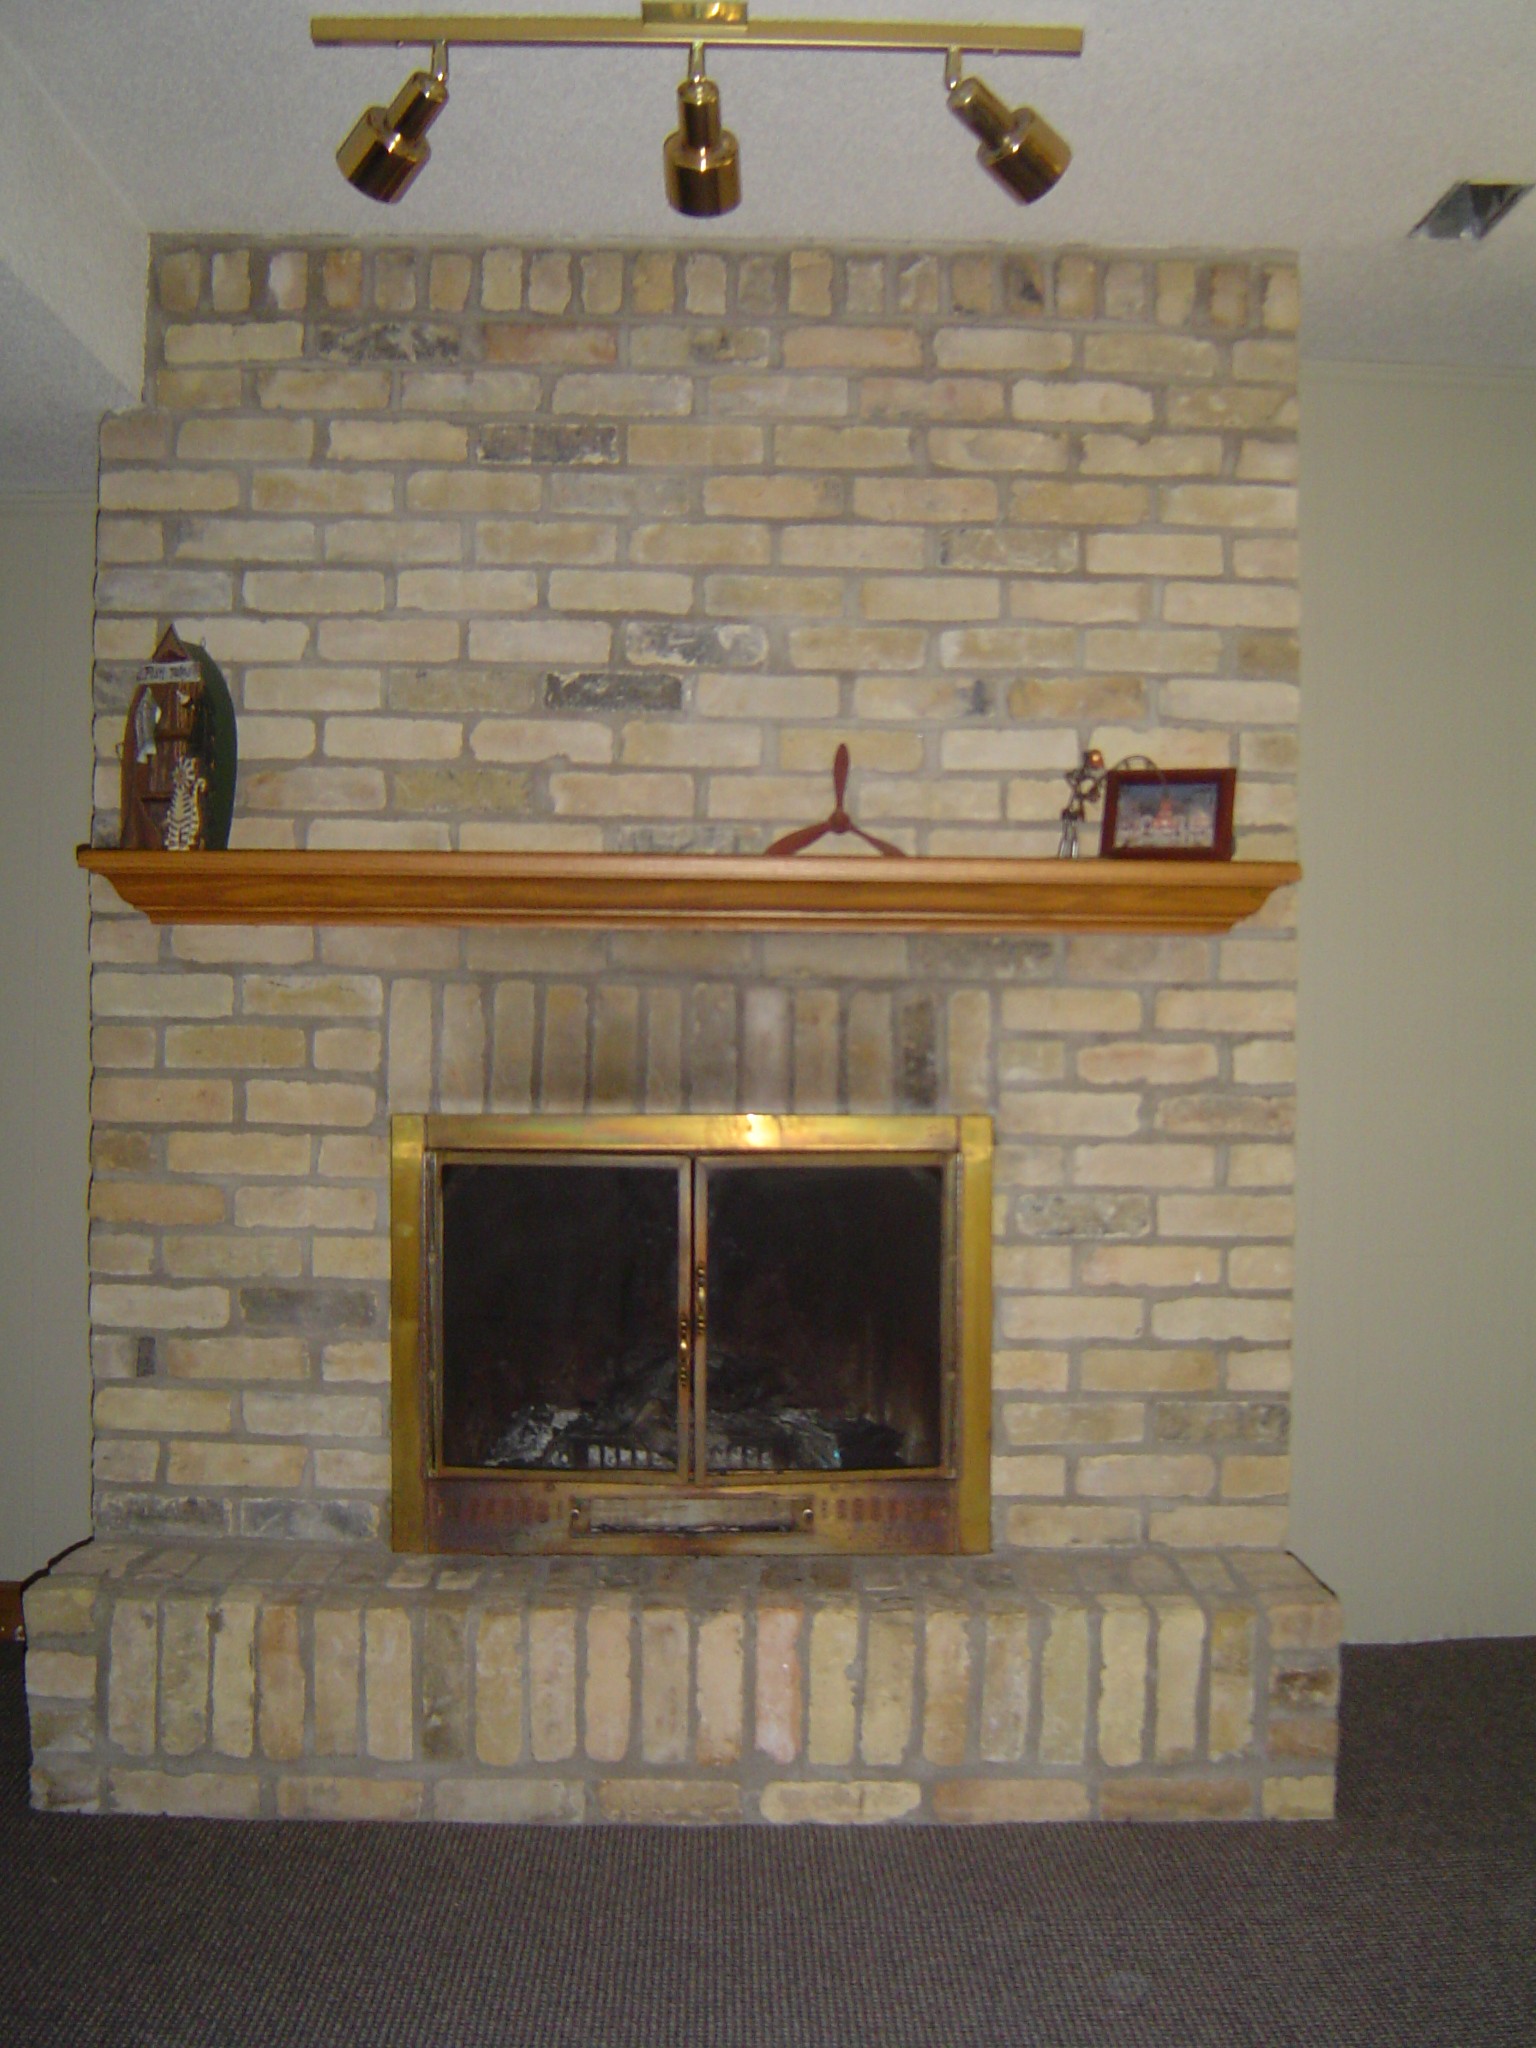 Floor to ceiling reclaimed yellow brick fireplace